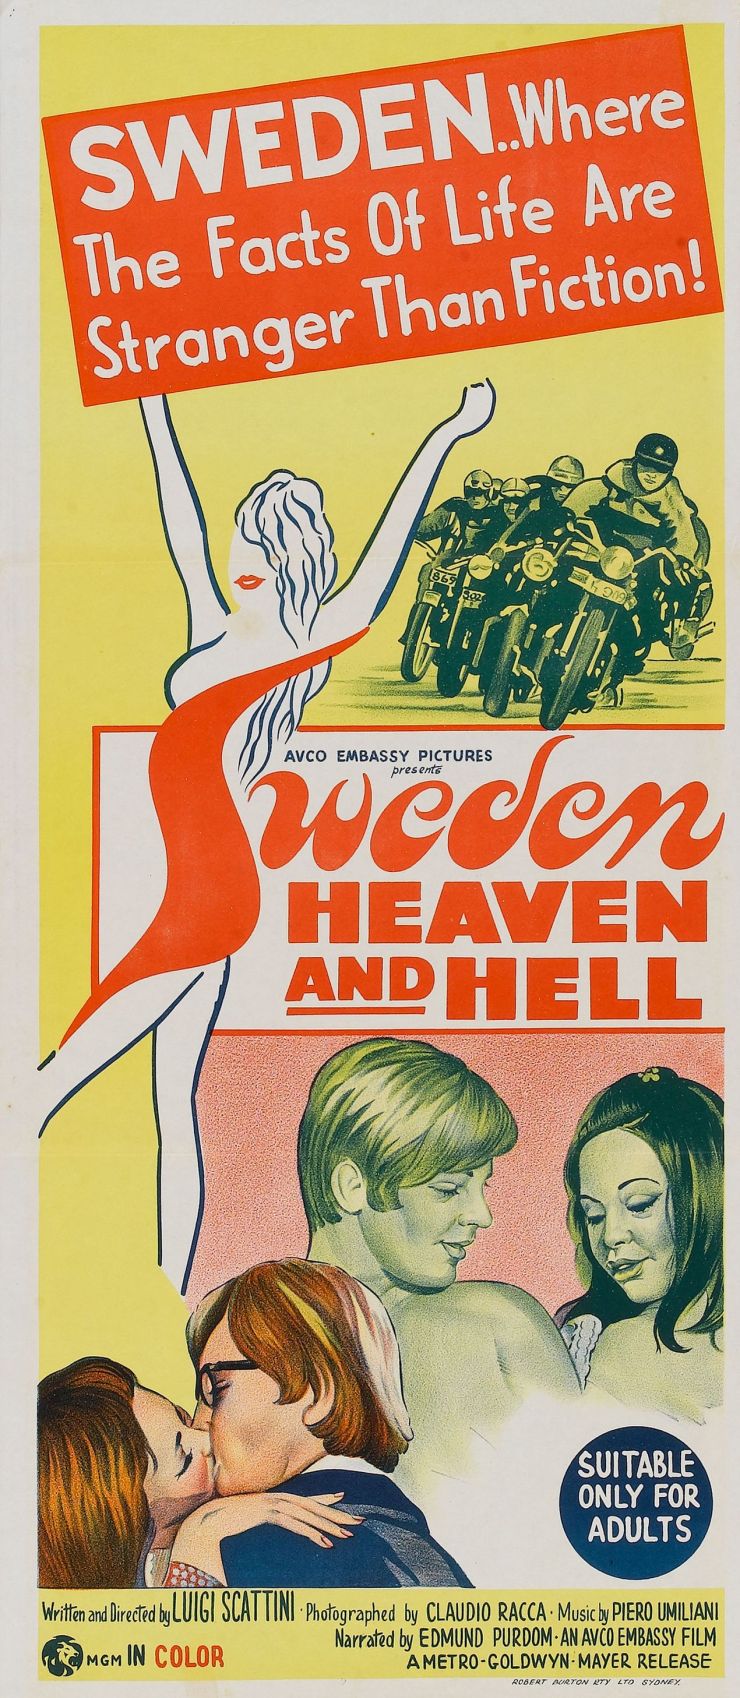 Sweden Heaven And Hell